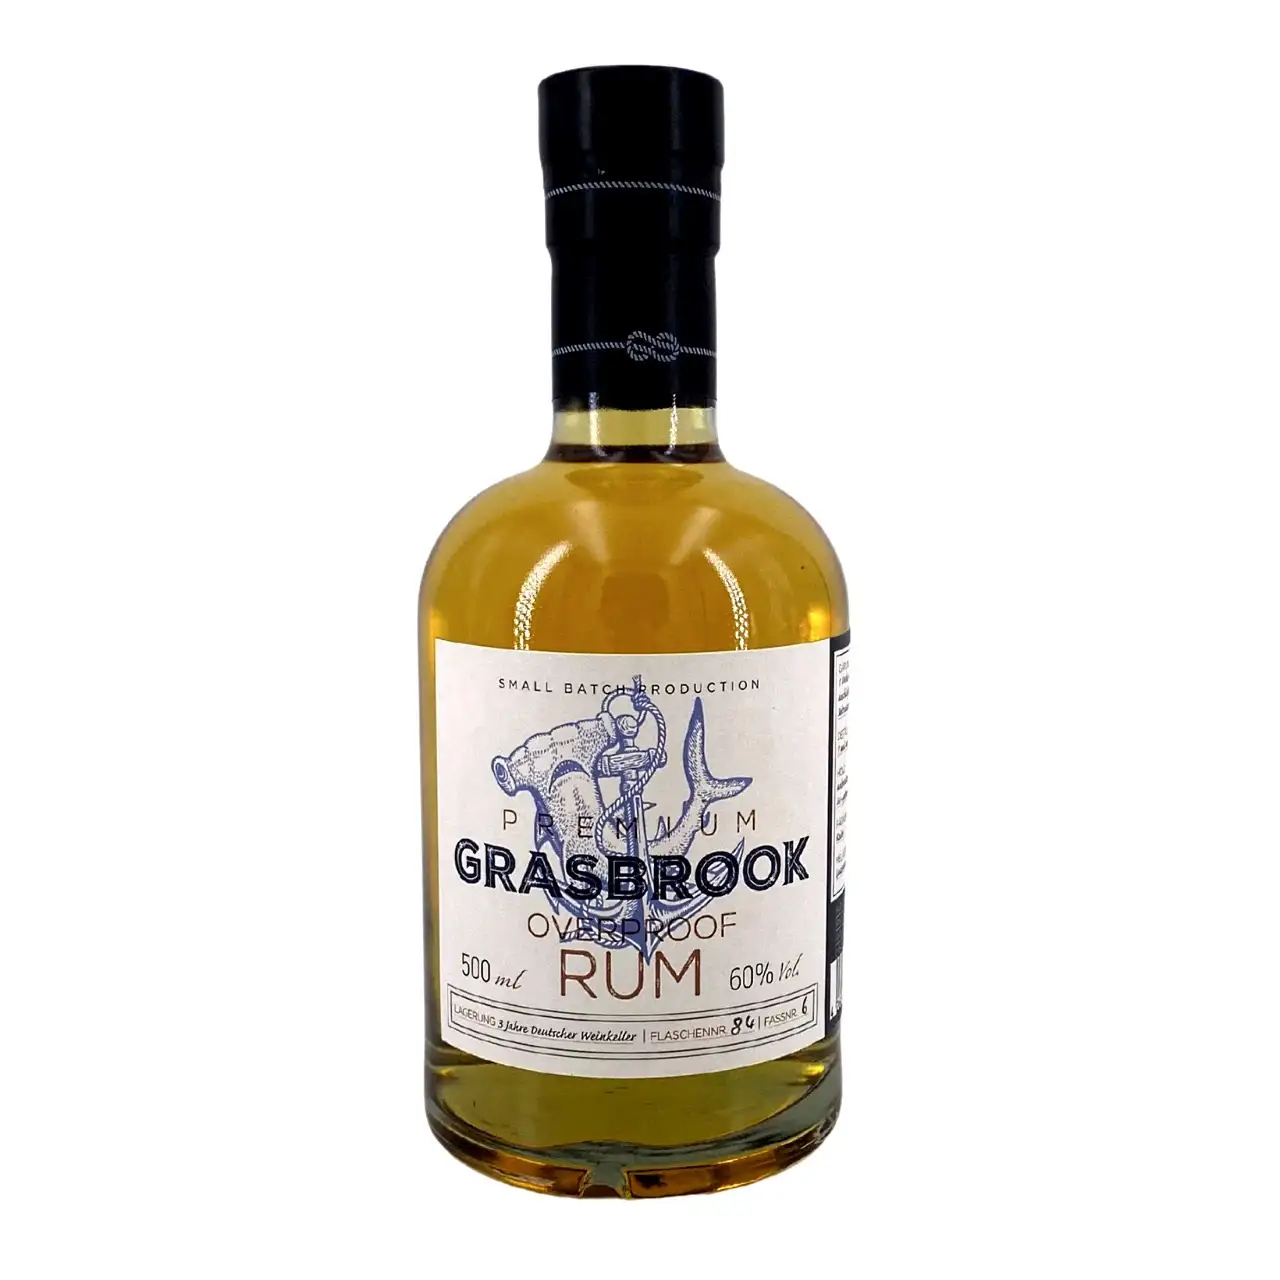 Image of the front of the bottle of the rum Grasbrook Overproof